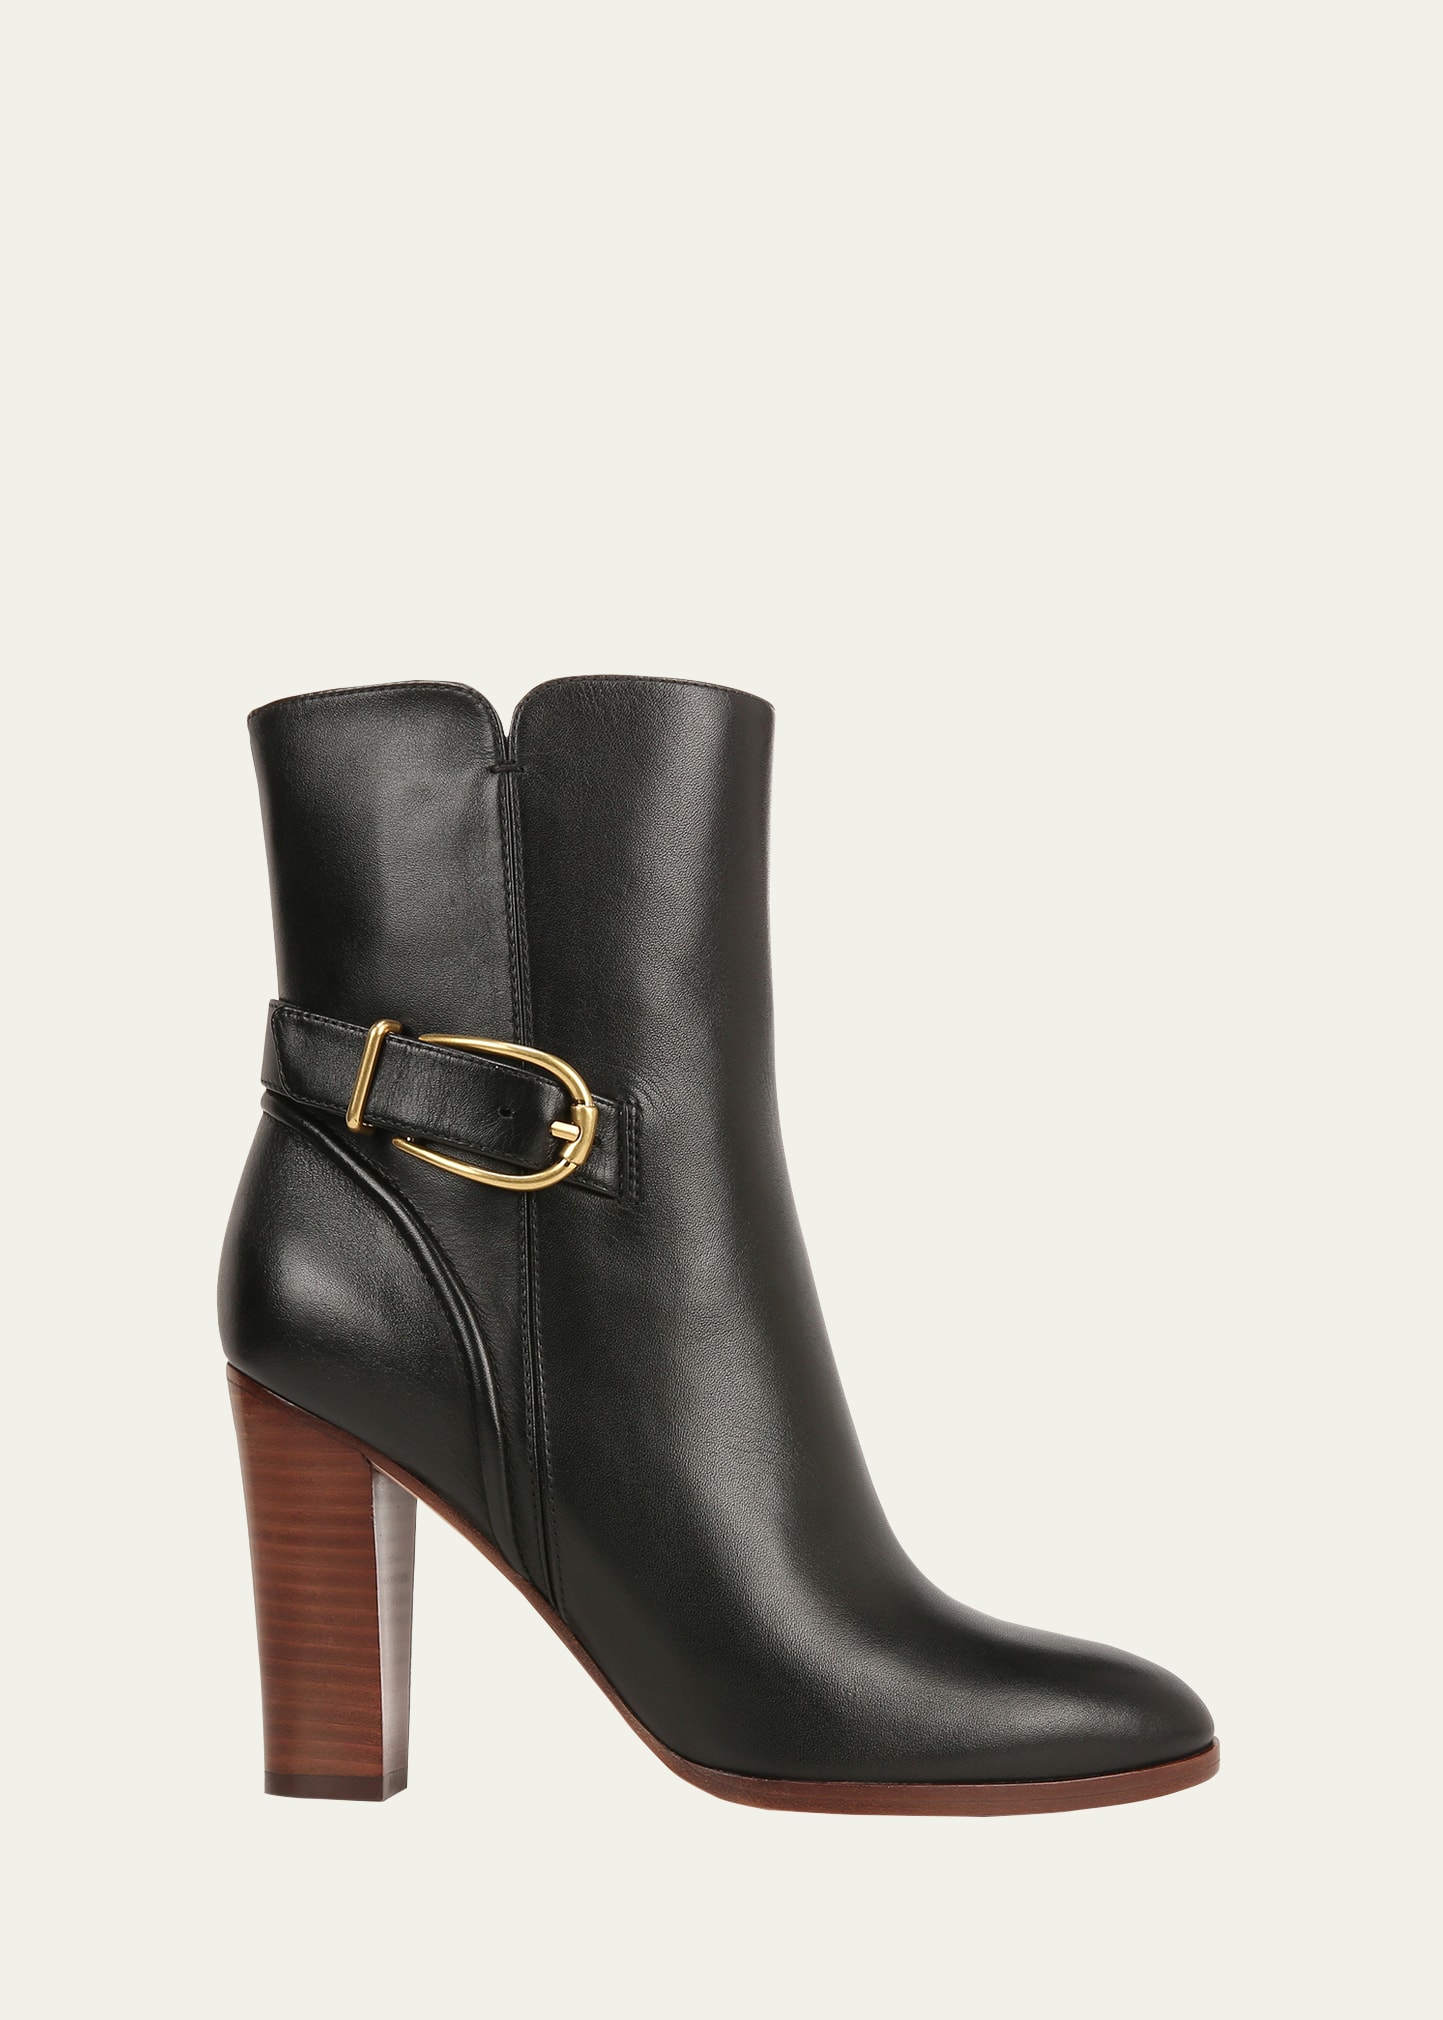 VERONICA BEARD LEATHER BUCKLE ANKLE BOOTIES